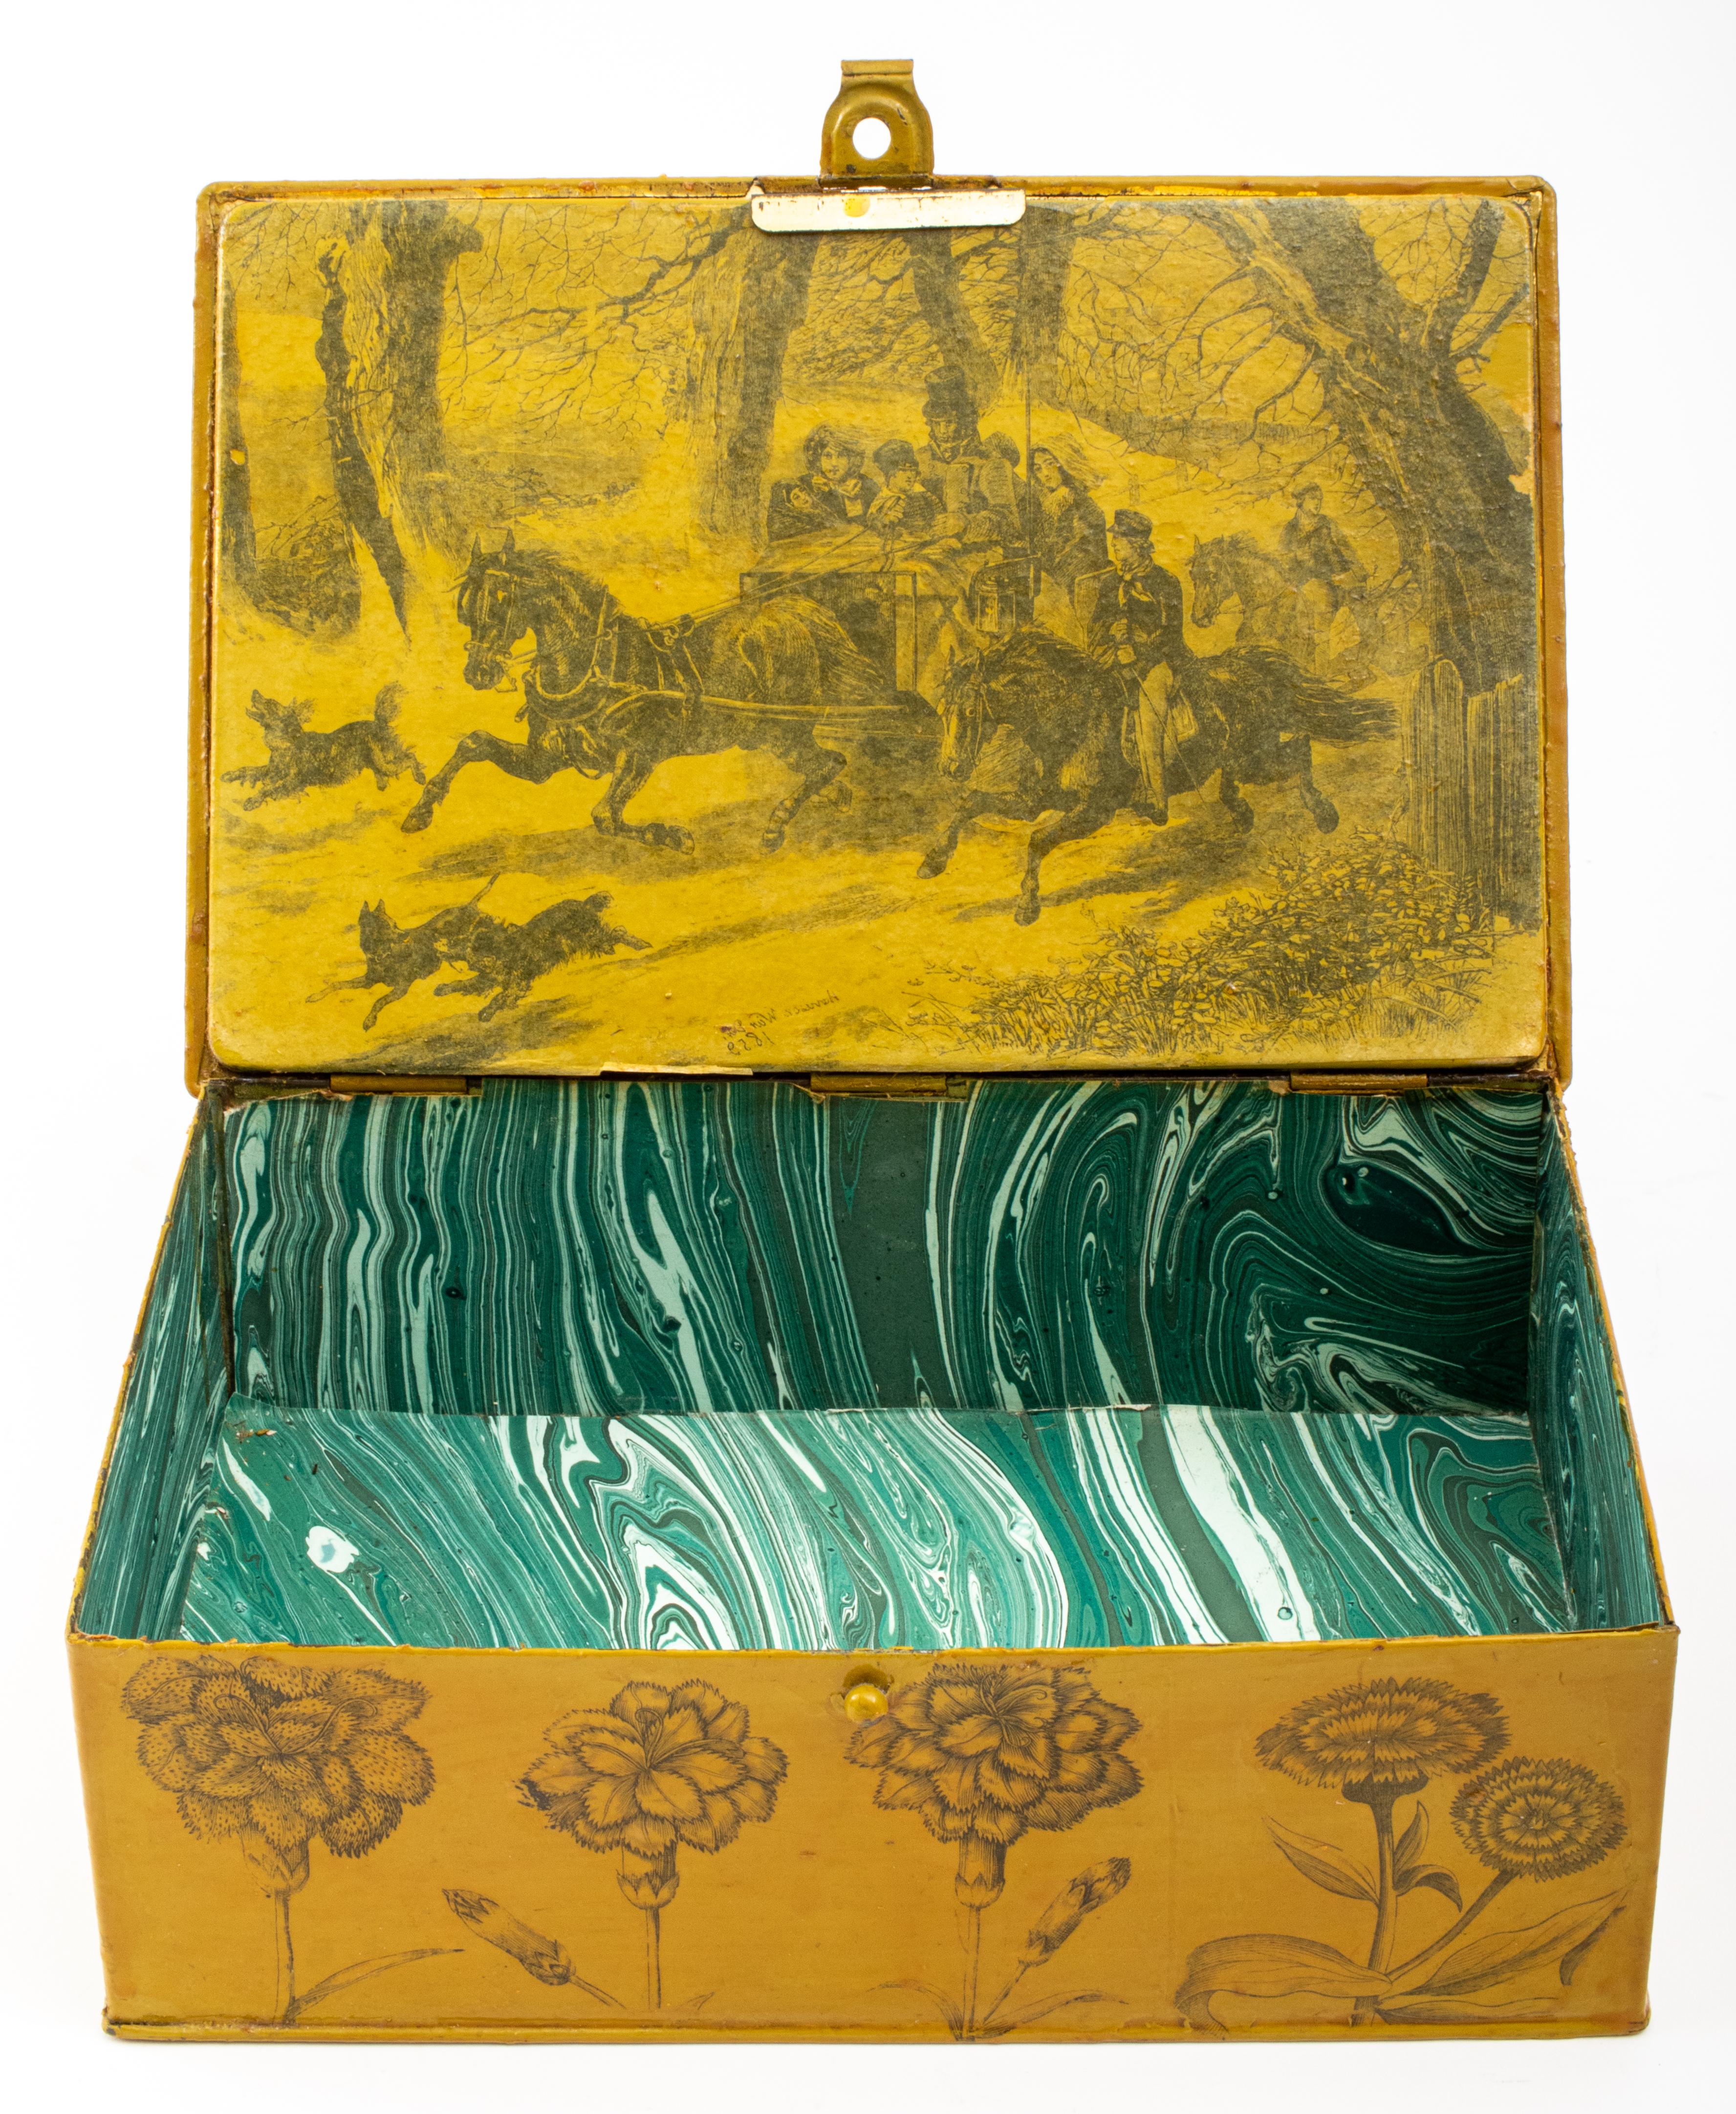 20th Century Decoupage-Decorated Painted Casket w/ Monkeys & Flowers For Sale